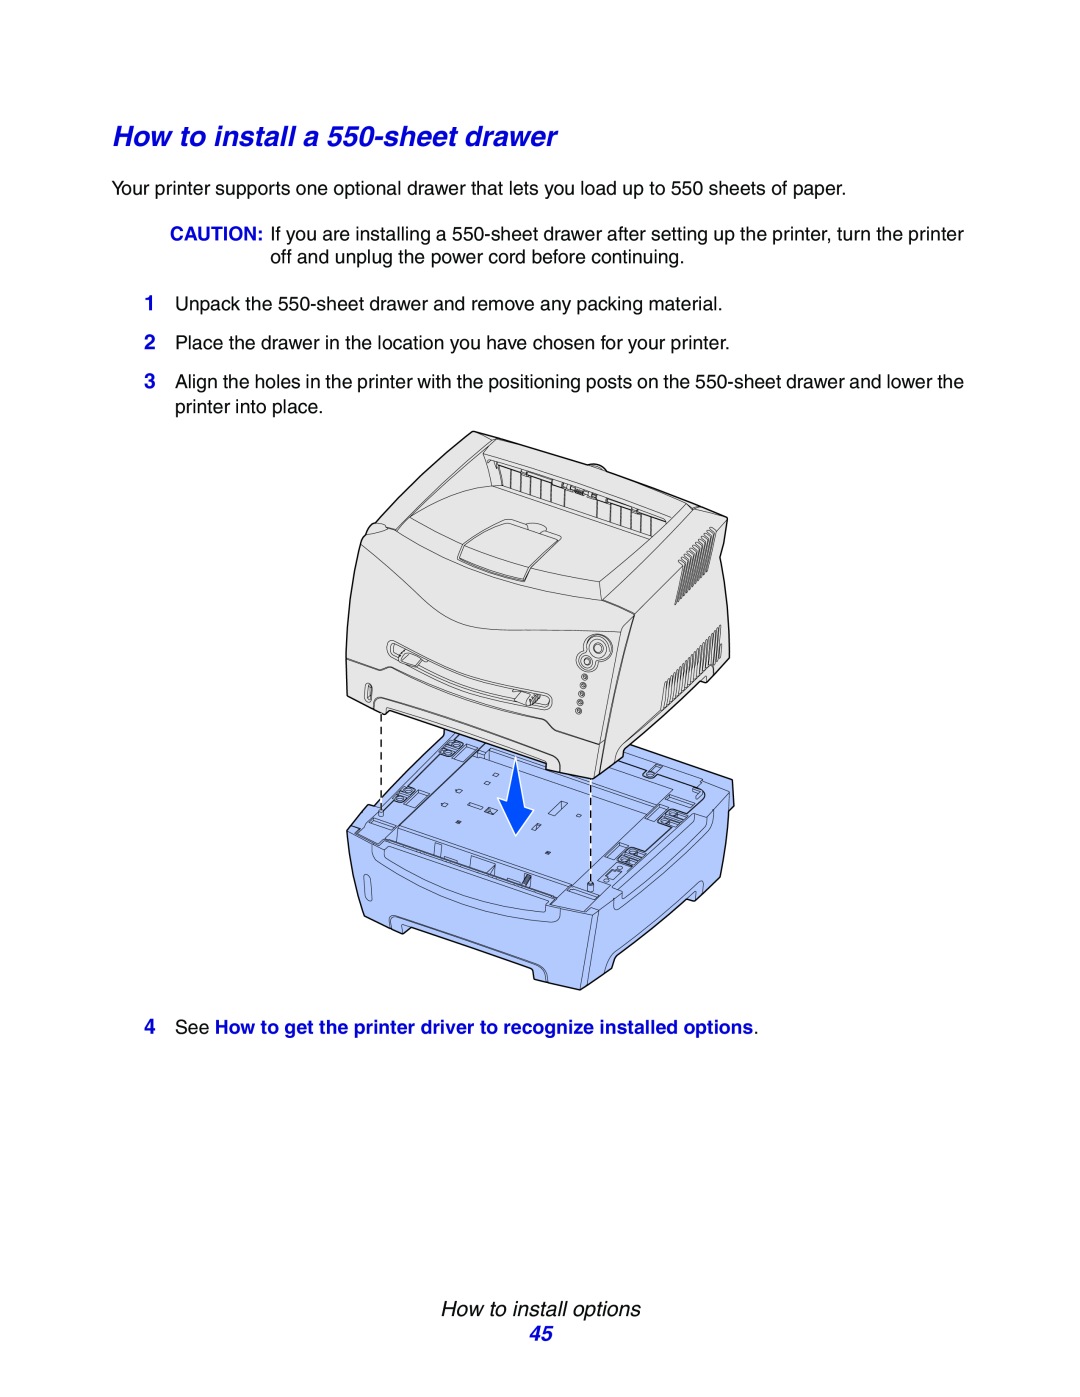 Lexmark E234N manual How to install a 550-sheetdrawer, How to install options 